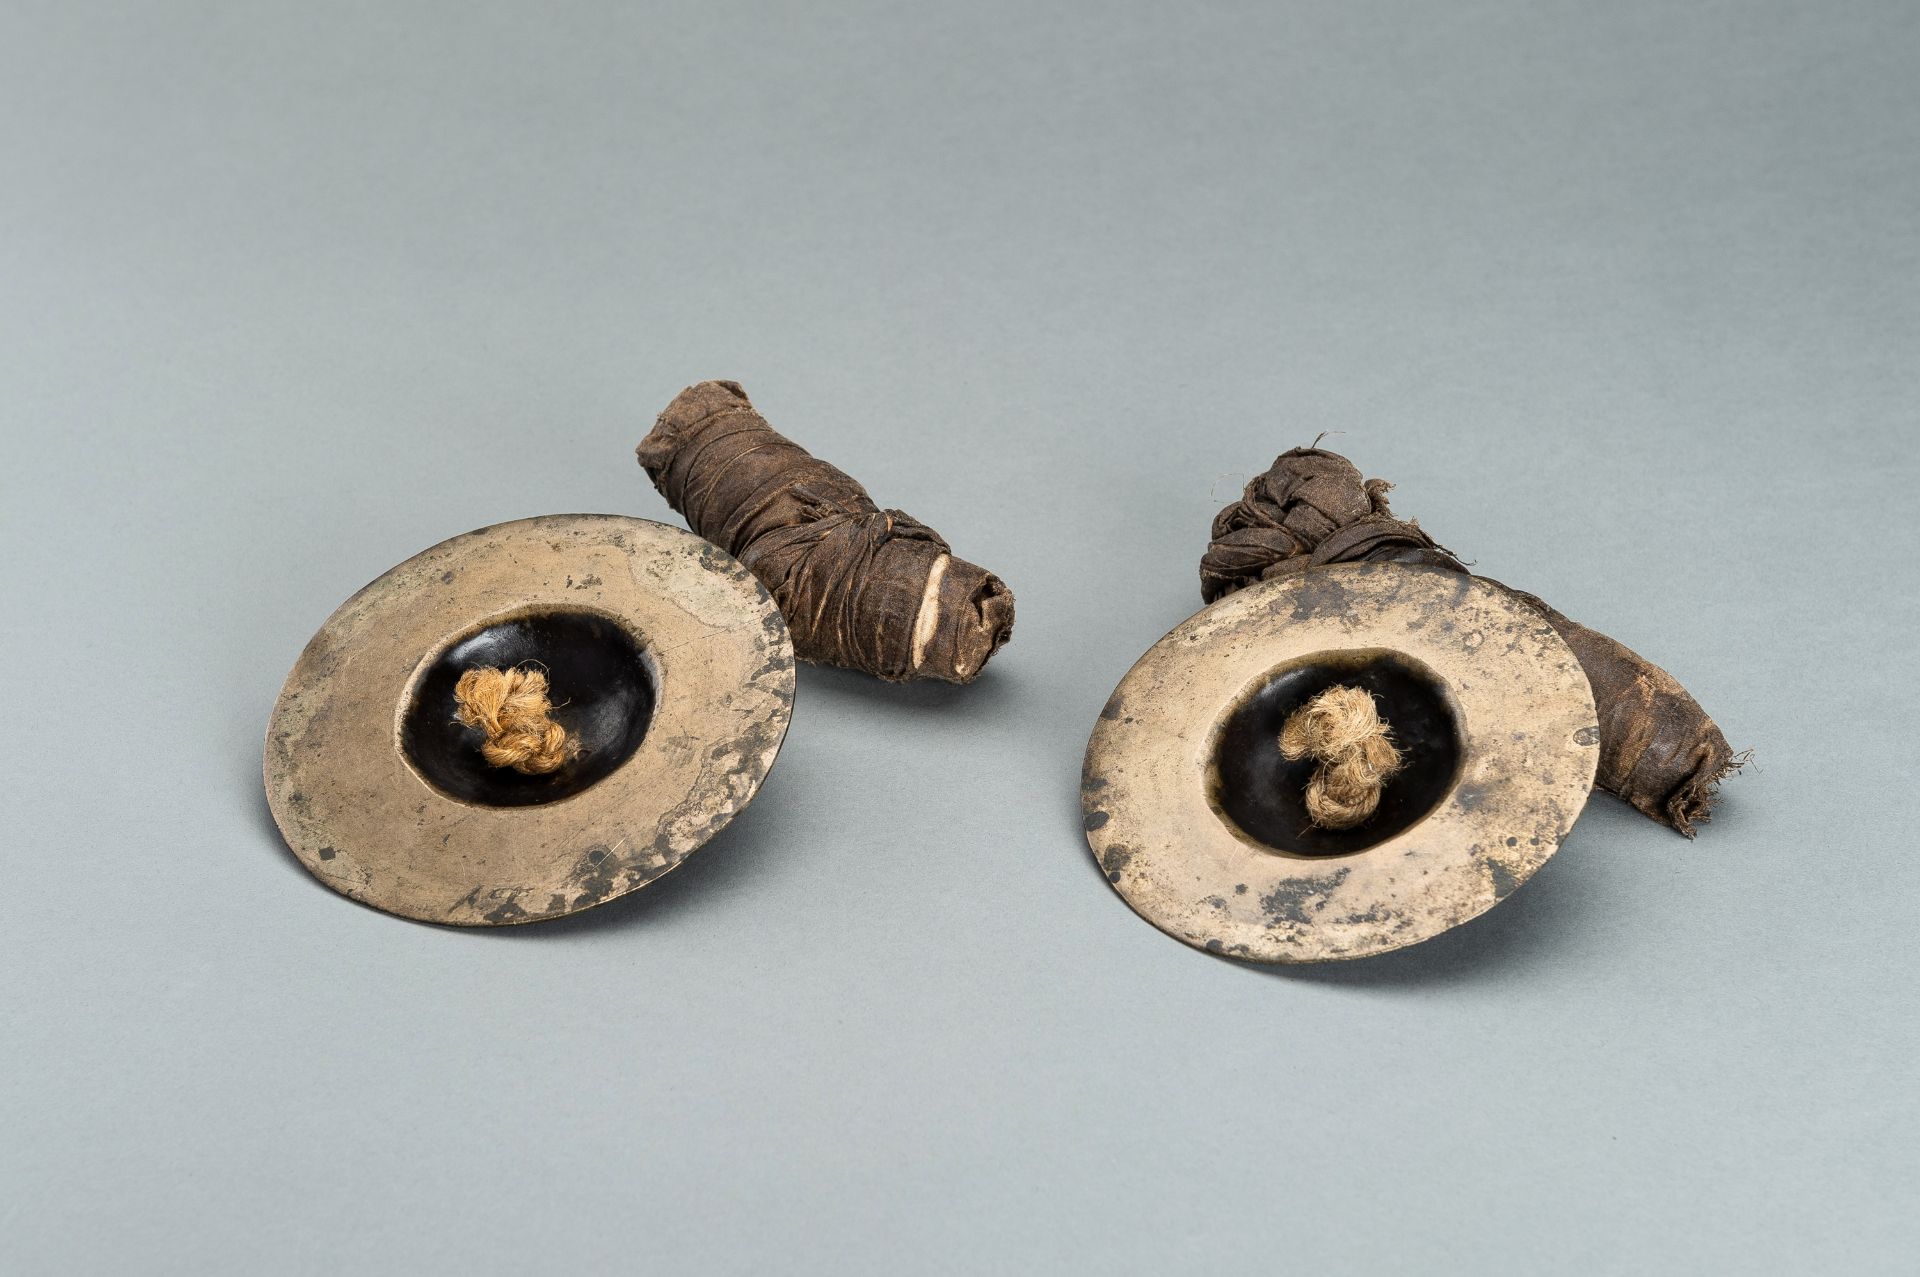 A RARE PAIR OF BRONZE CYMBALS, 19th CENTURY - Image 9 of 10